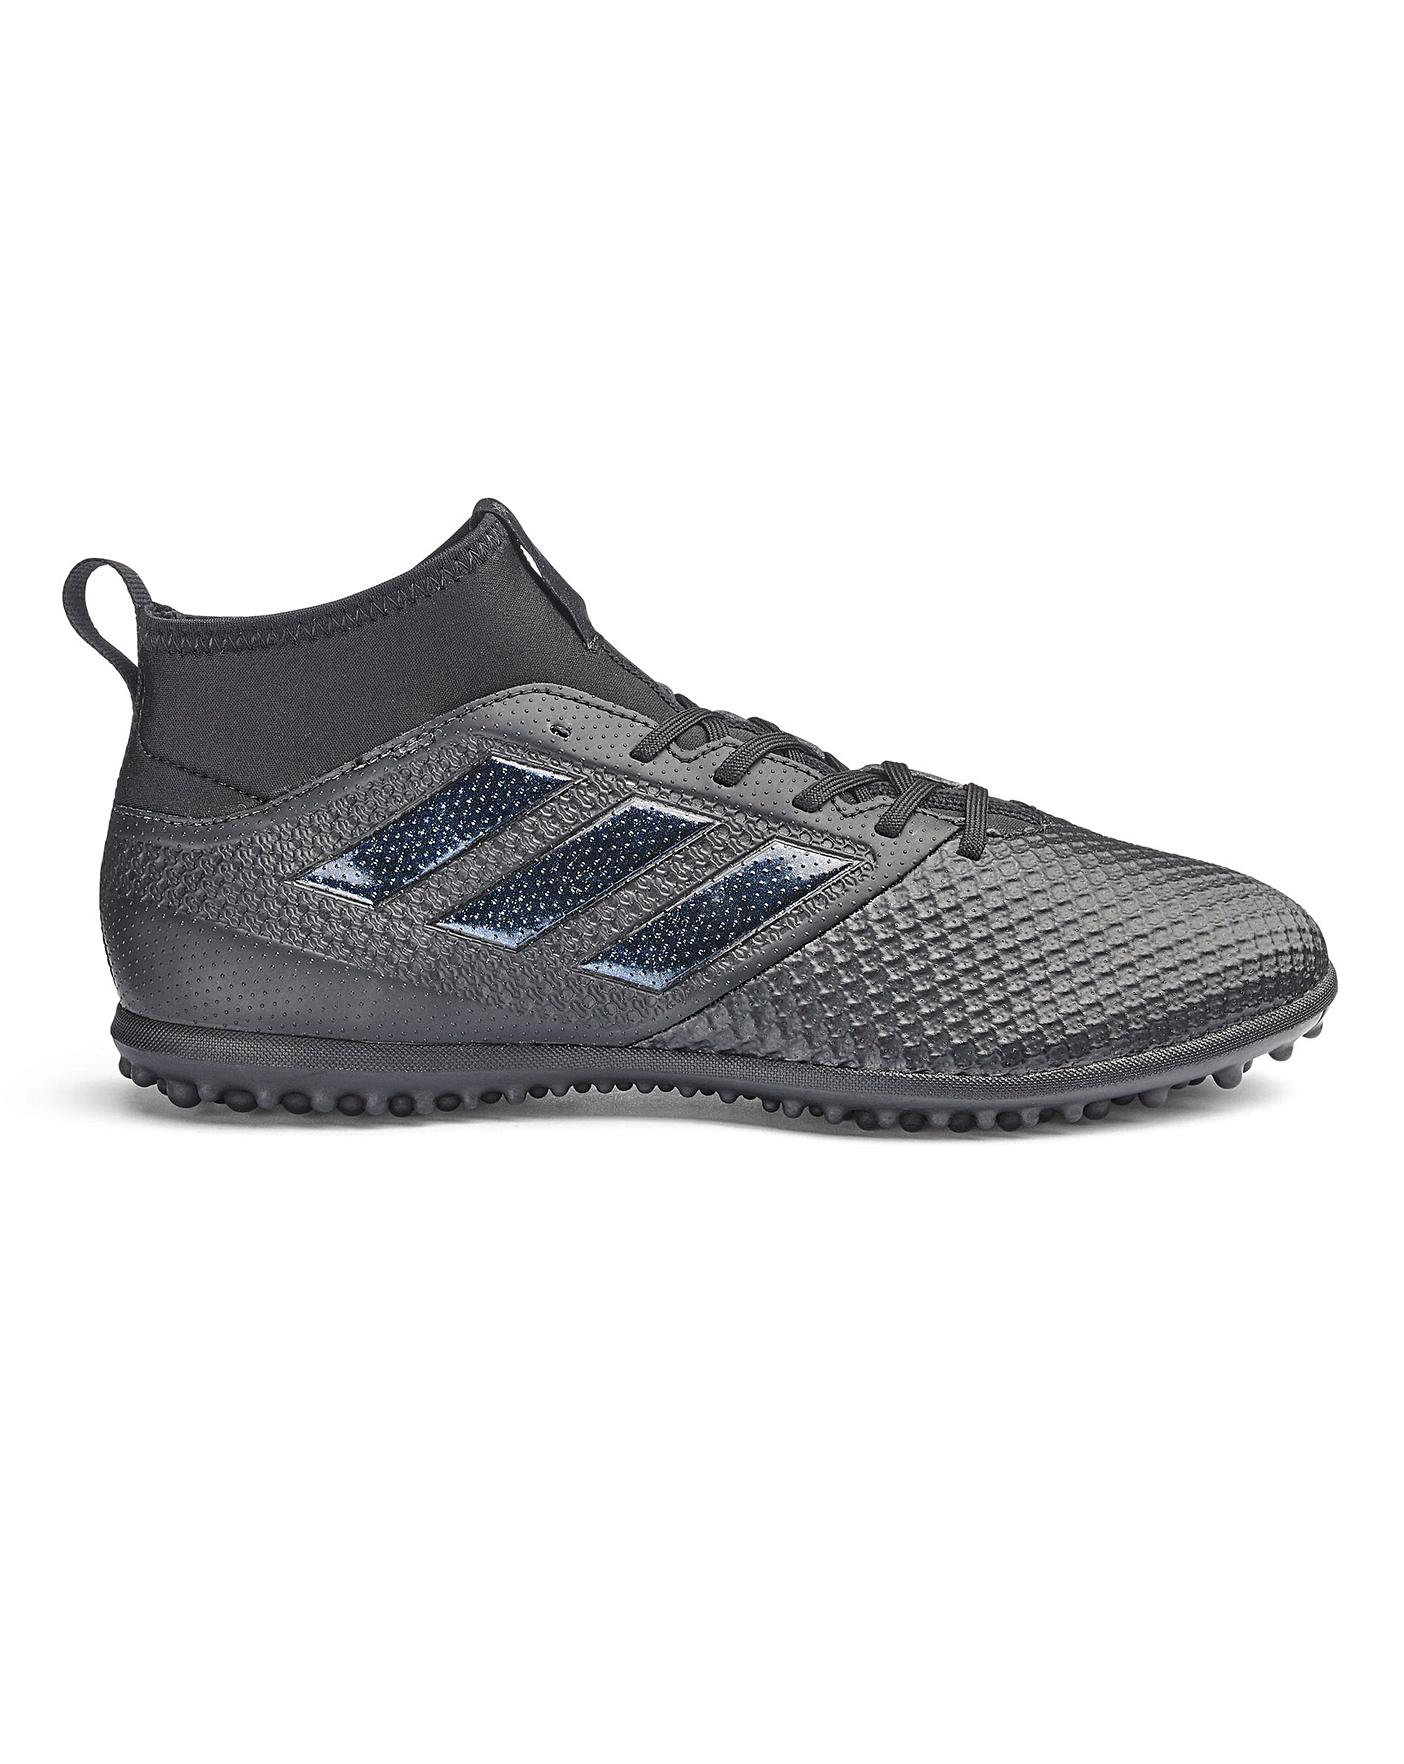 adidas Ace Tango 17.3 TF Boots | Oxendales